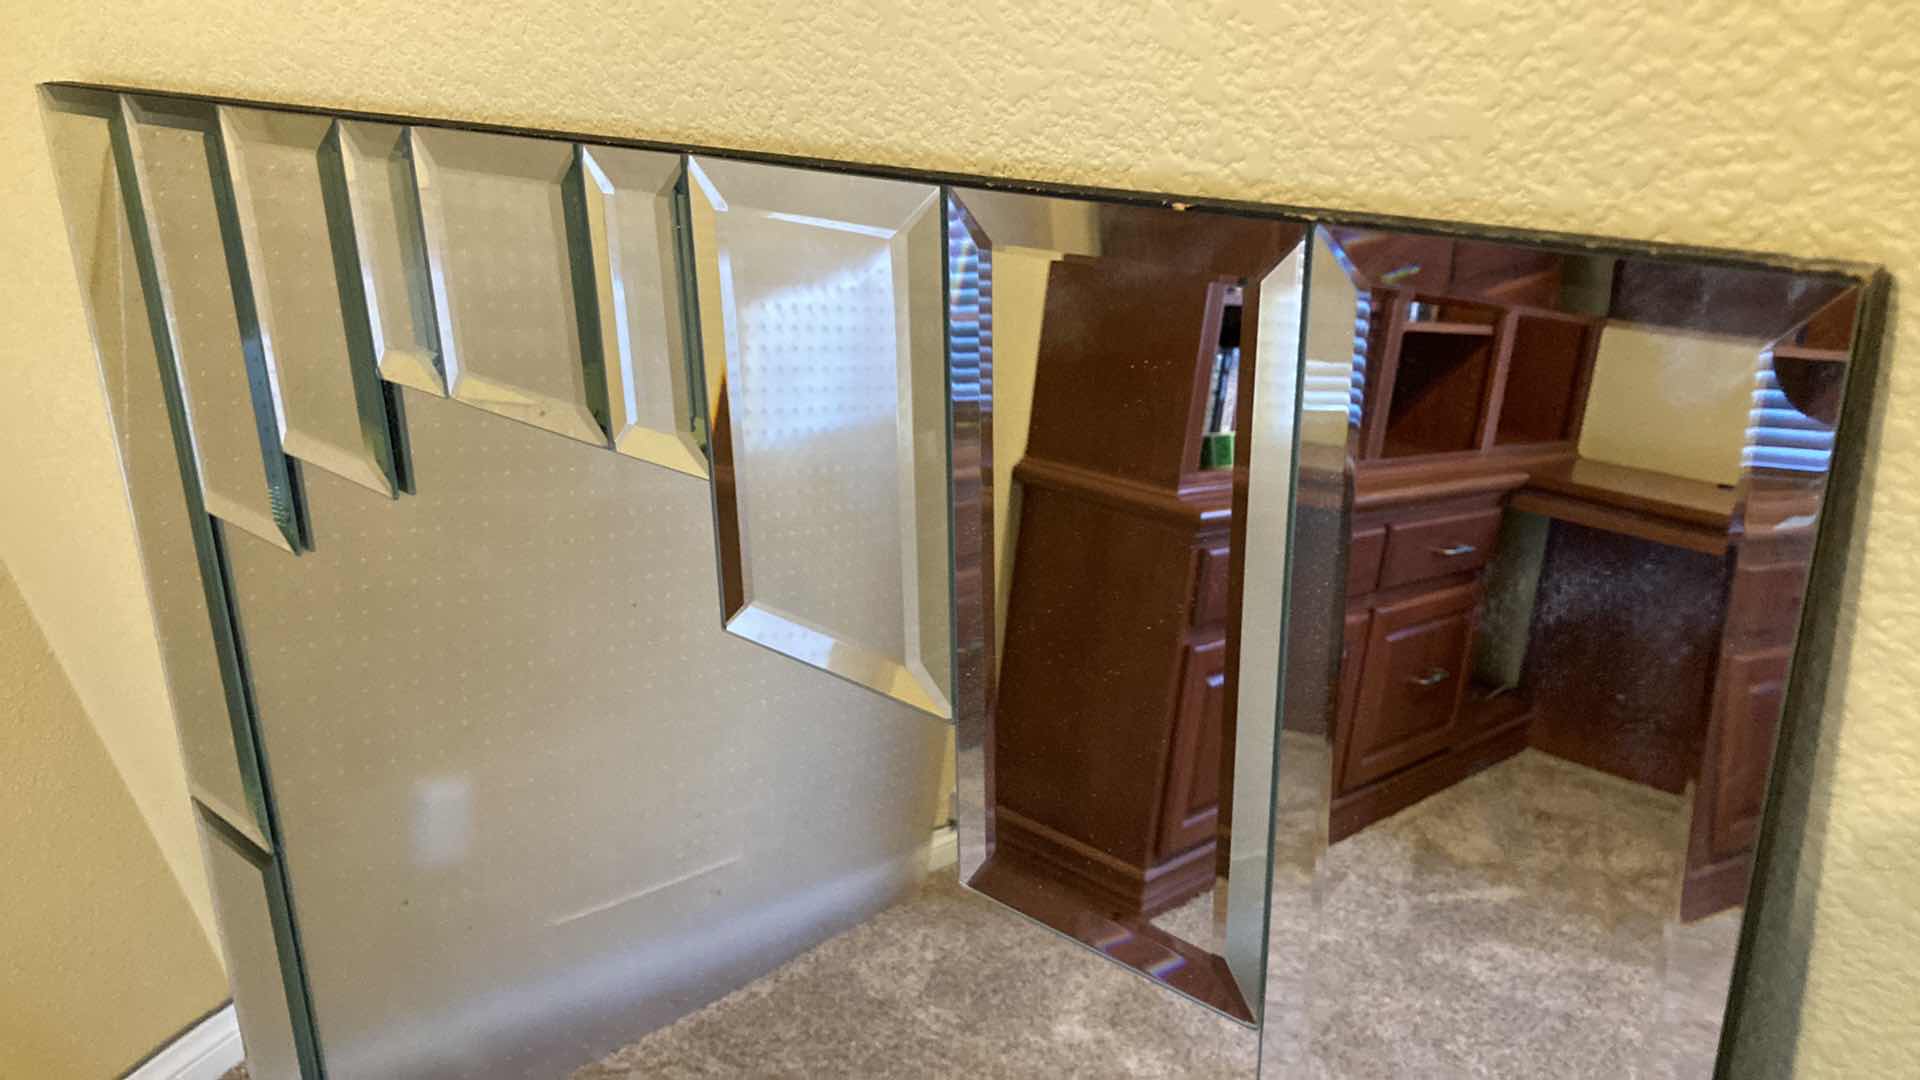 Photo 3 of MID-CENTURY BEVELED MIRRORED GLASS FRAMED MIRROR 32” X 48”